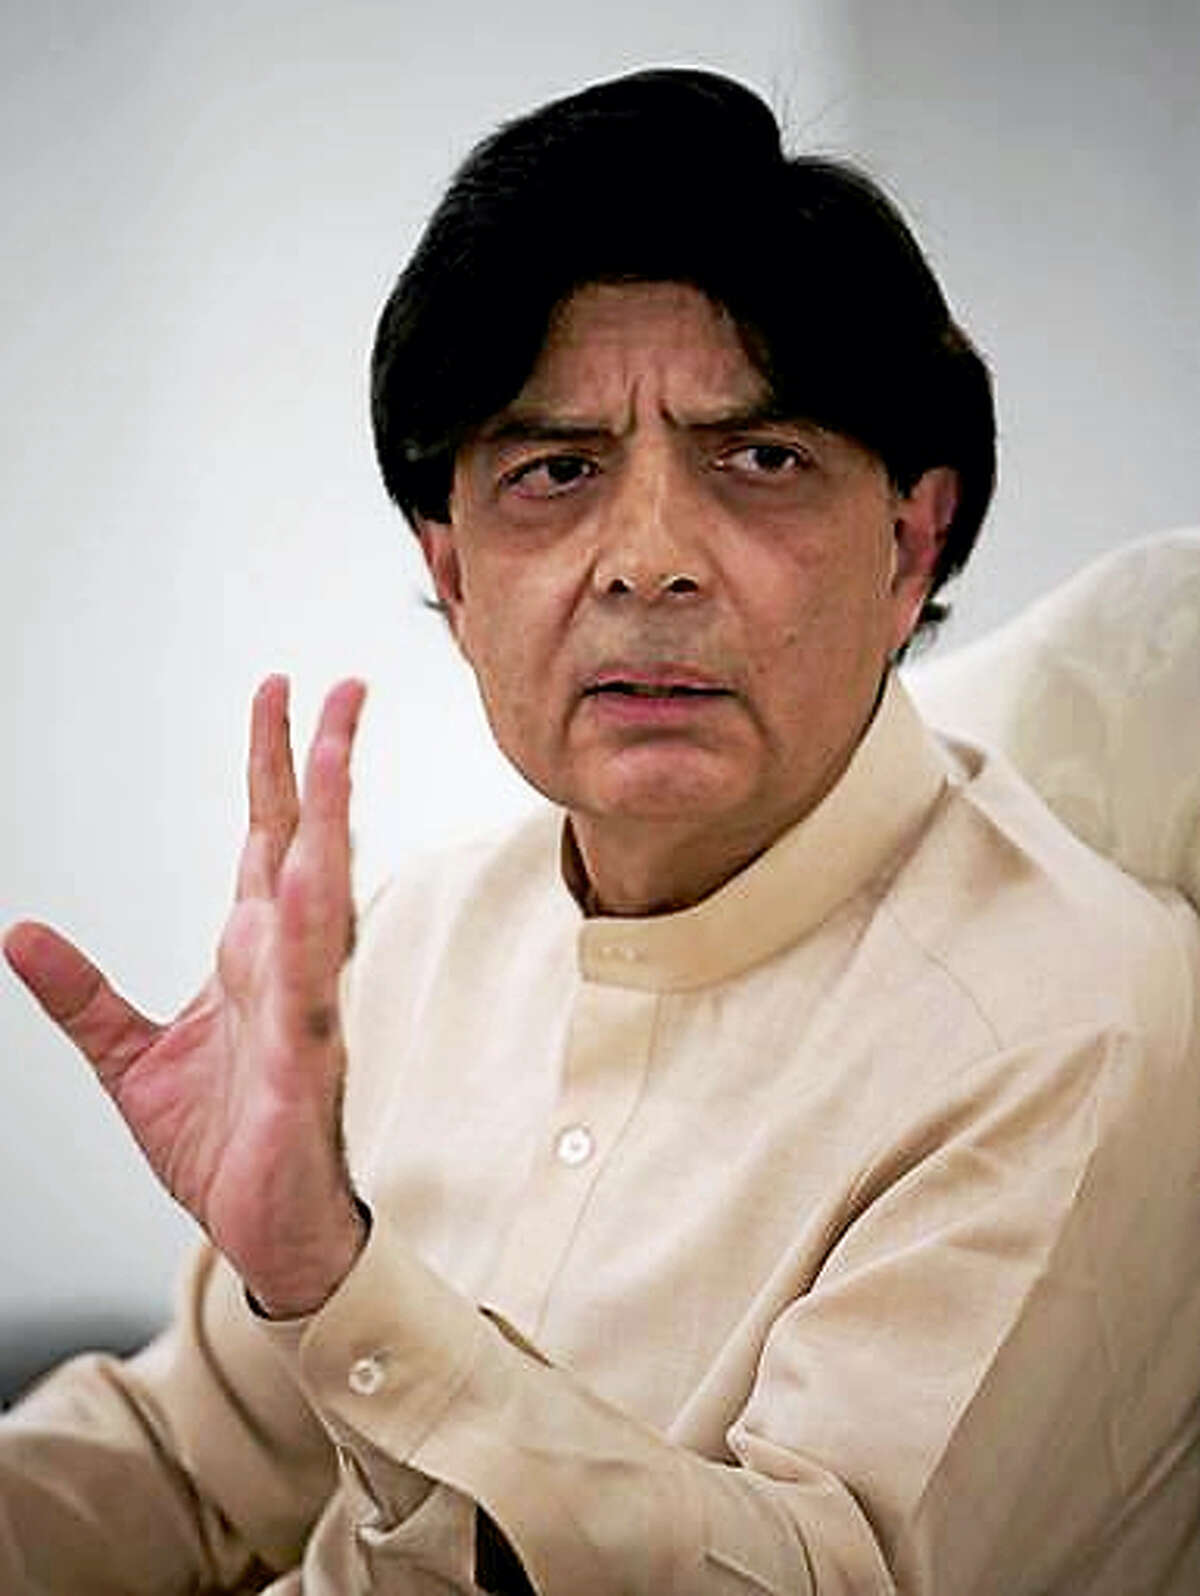 Pakistan’s Interior Minister, Chaudhry Nisar Ali Khan addresses a news conference in Islamabad, Pakistan, Tuesday, May 24, 2016. Khan said authorities will perform DNA tests on the body of a man who was killed in an American drone strike to determine whether the slain man is actually Taliban chief Mullah Mohammed Akhtar Mansour. Khan also condemned the drone strike, calling it a violation of Pakistan’s sovereignty.